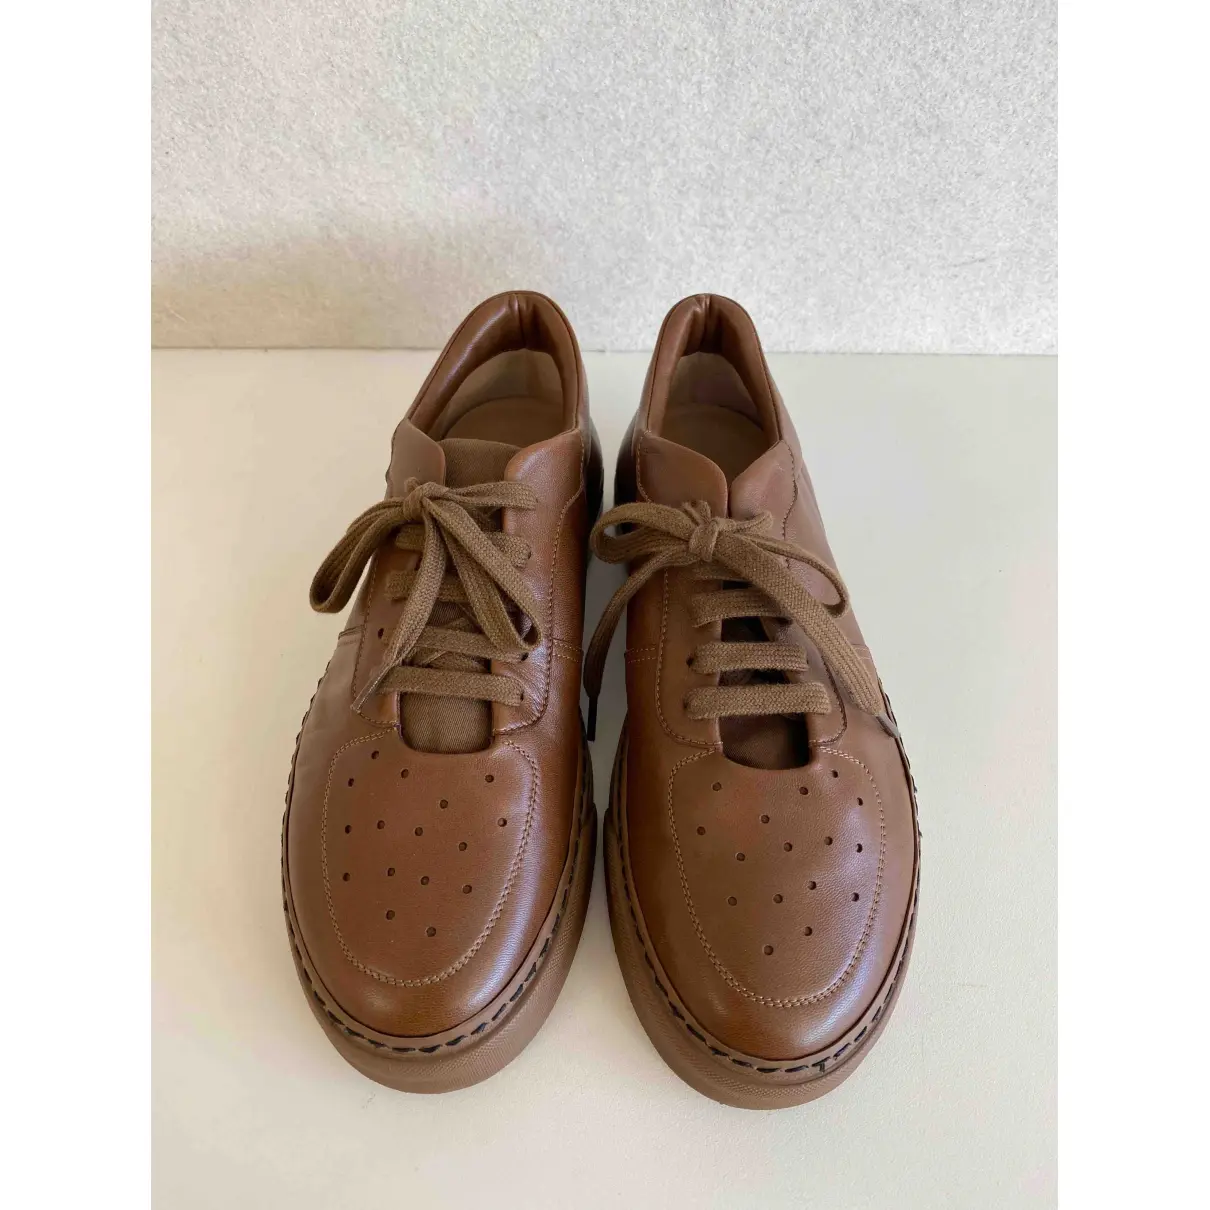 Buy Dear Frances Leather trainers online